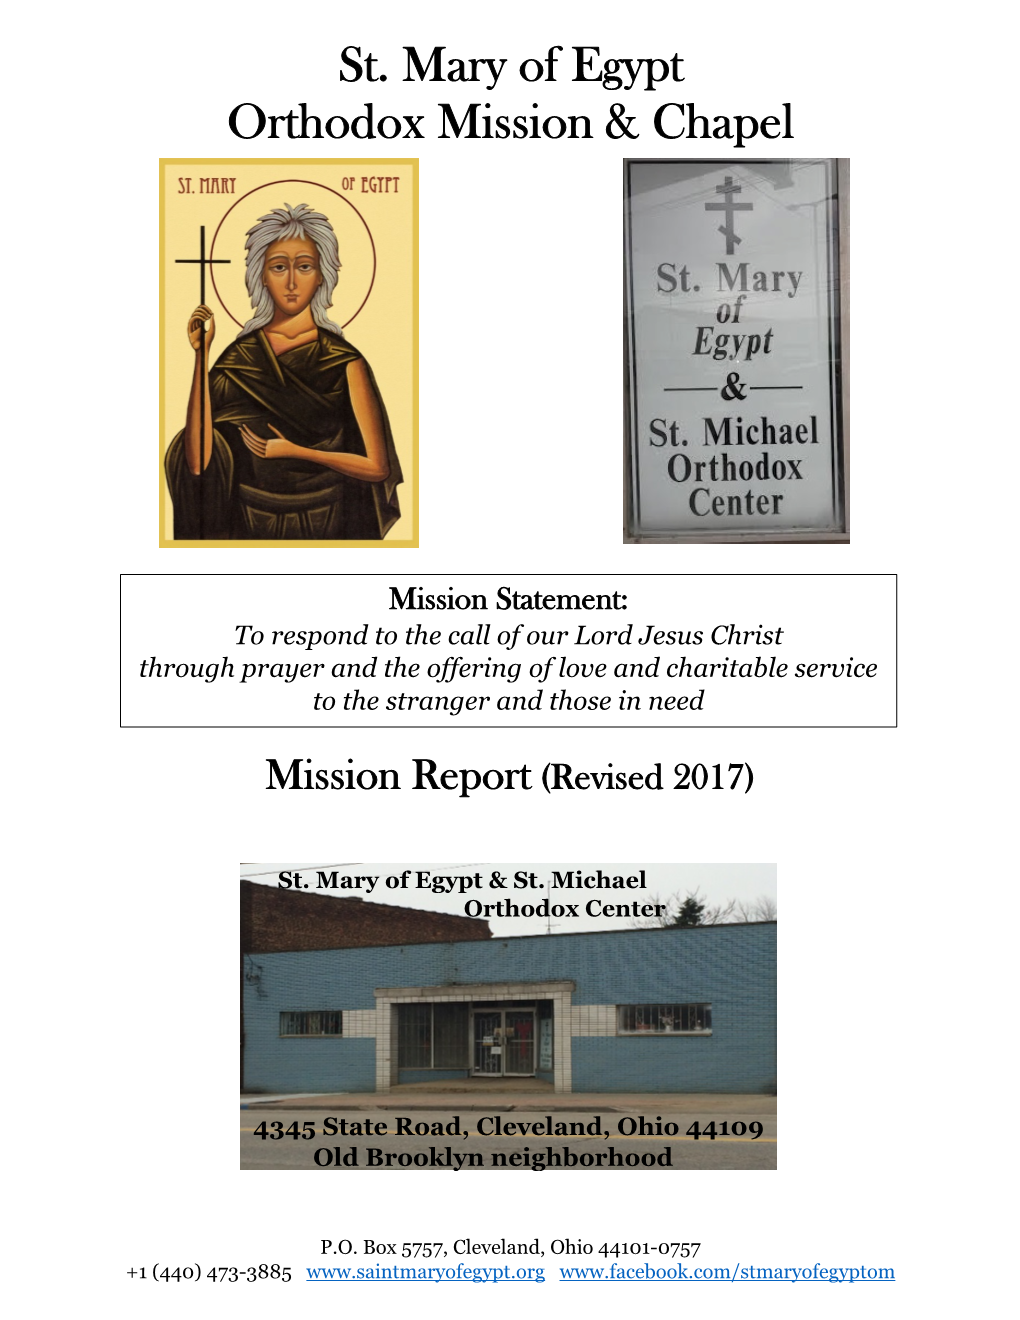 St. Mary of Egypt Mission Report (Rev. March 2017)